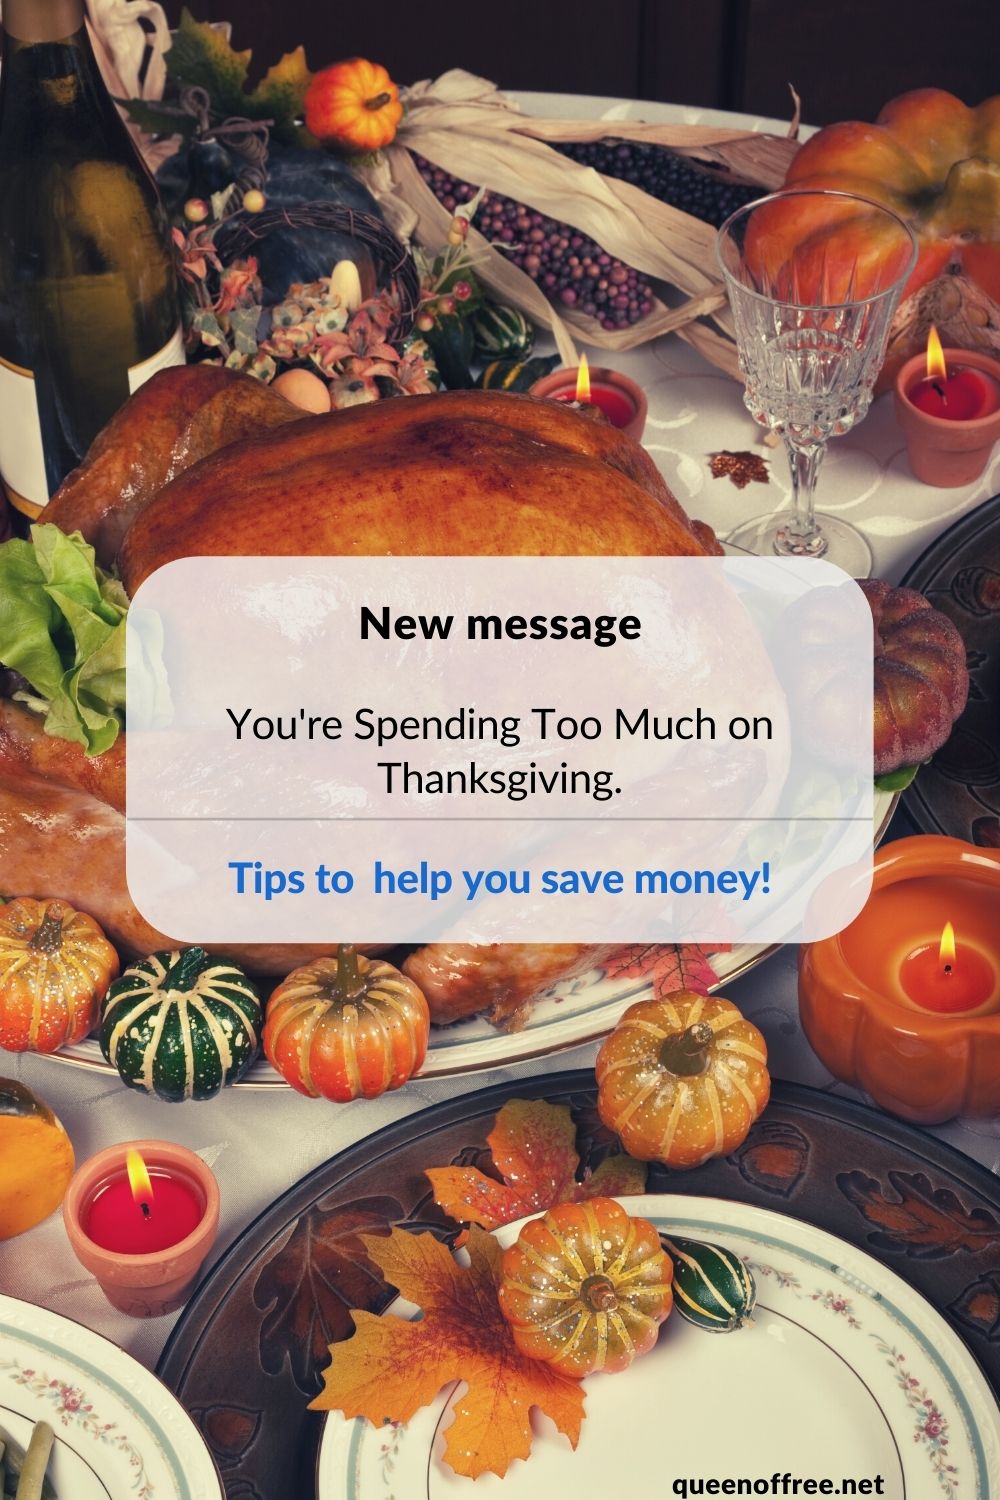 Stop overspending, STAT. Save Money on Thanksgiving this year with these smart and simple tips for your feast.